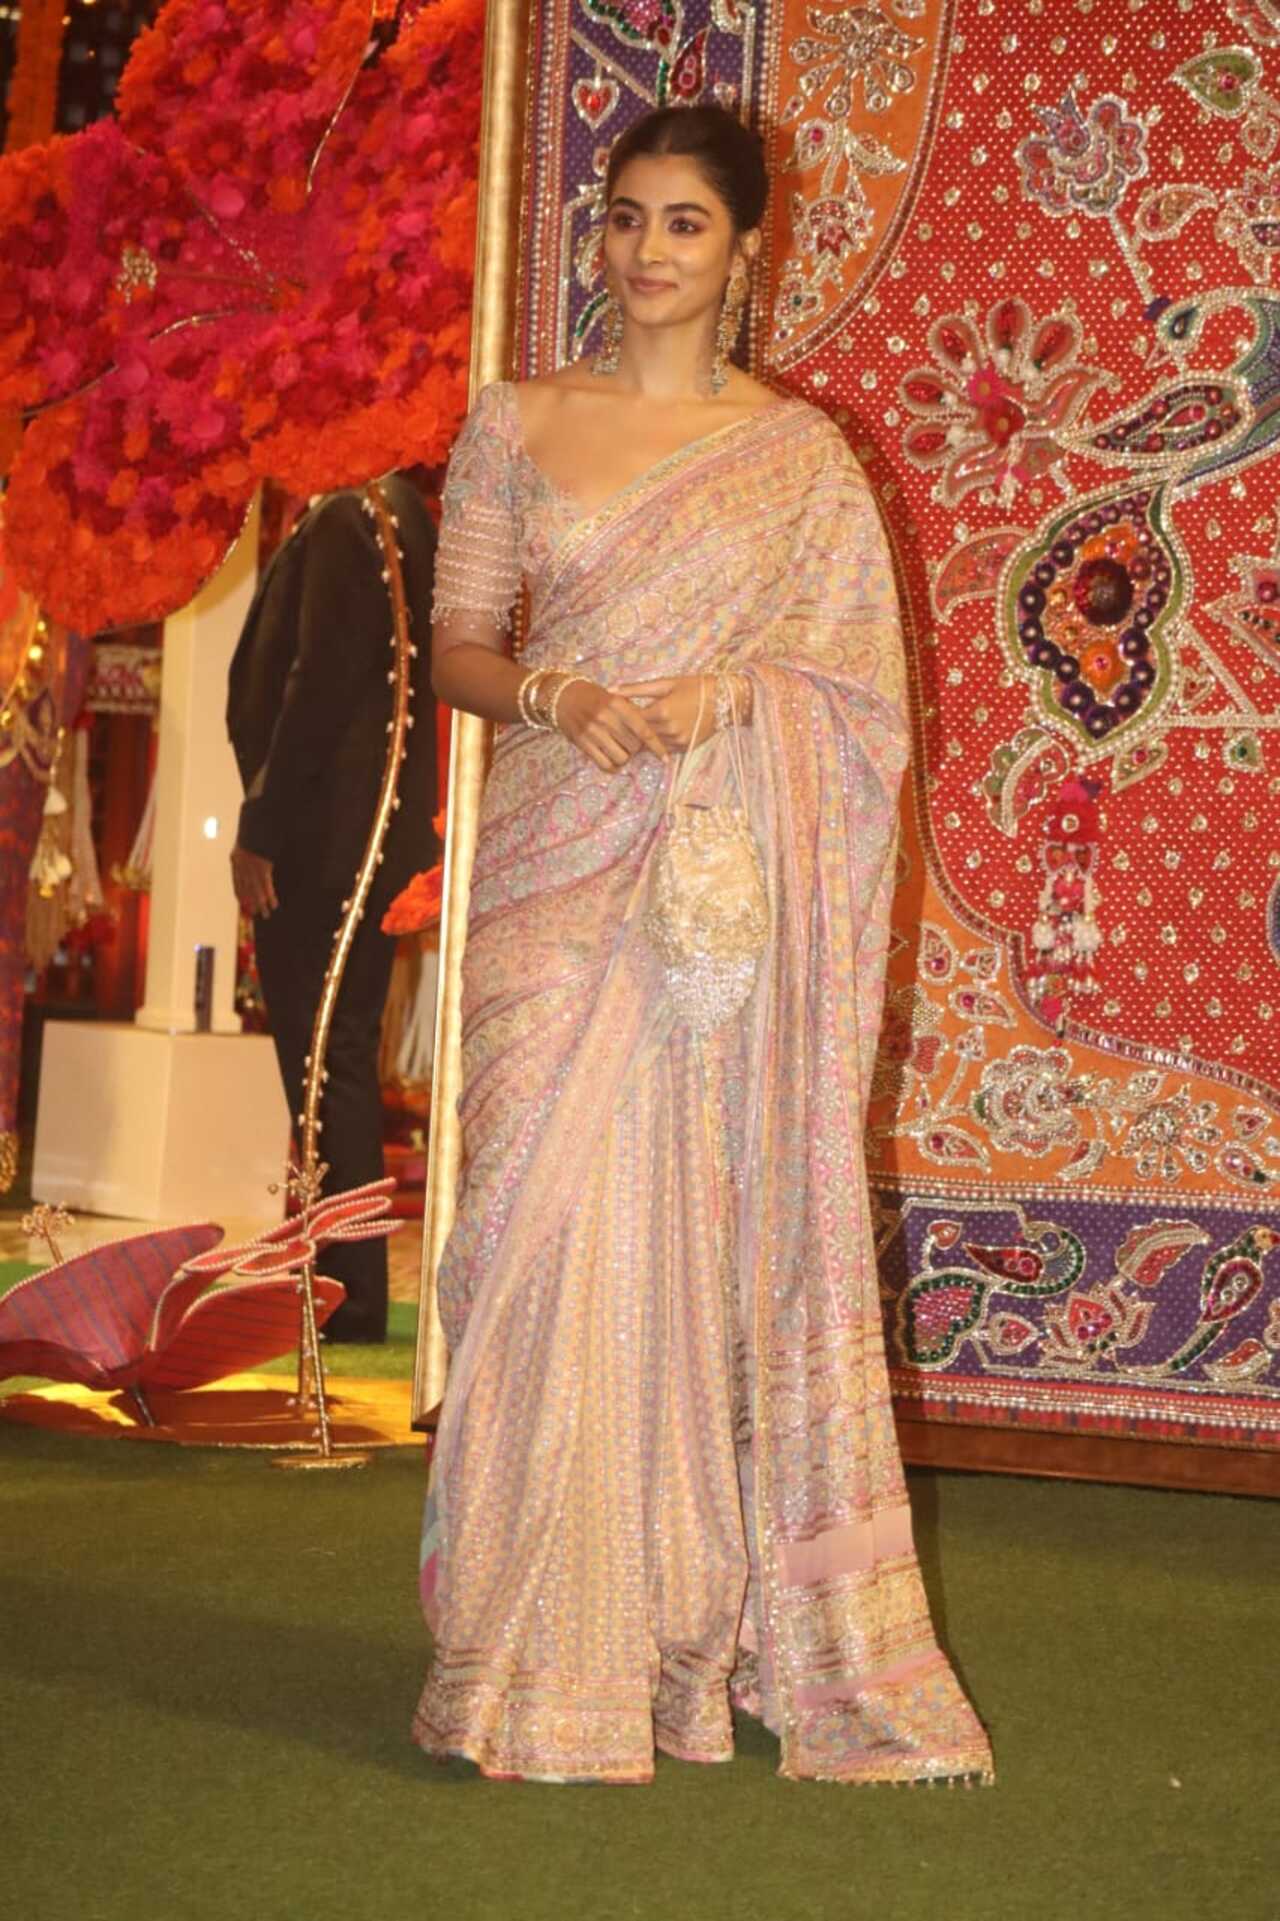 Pooja Hegde wore a pastel-coloured saree to the Ganesh Puja. She looked gorgeous in her ethnic avatar